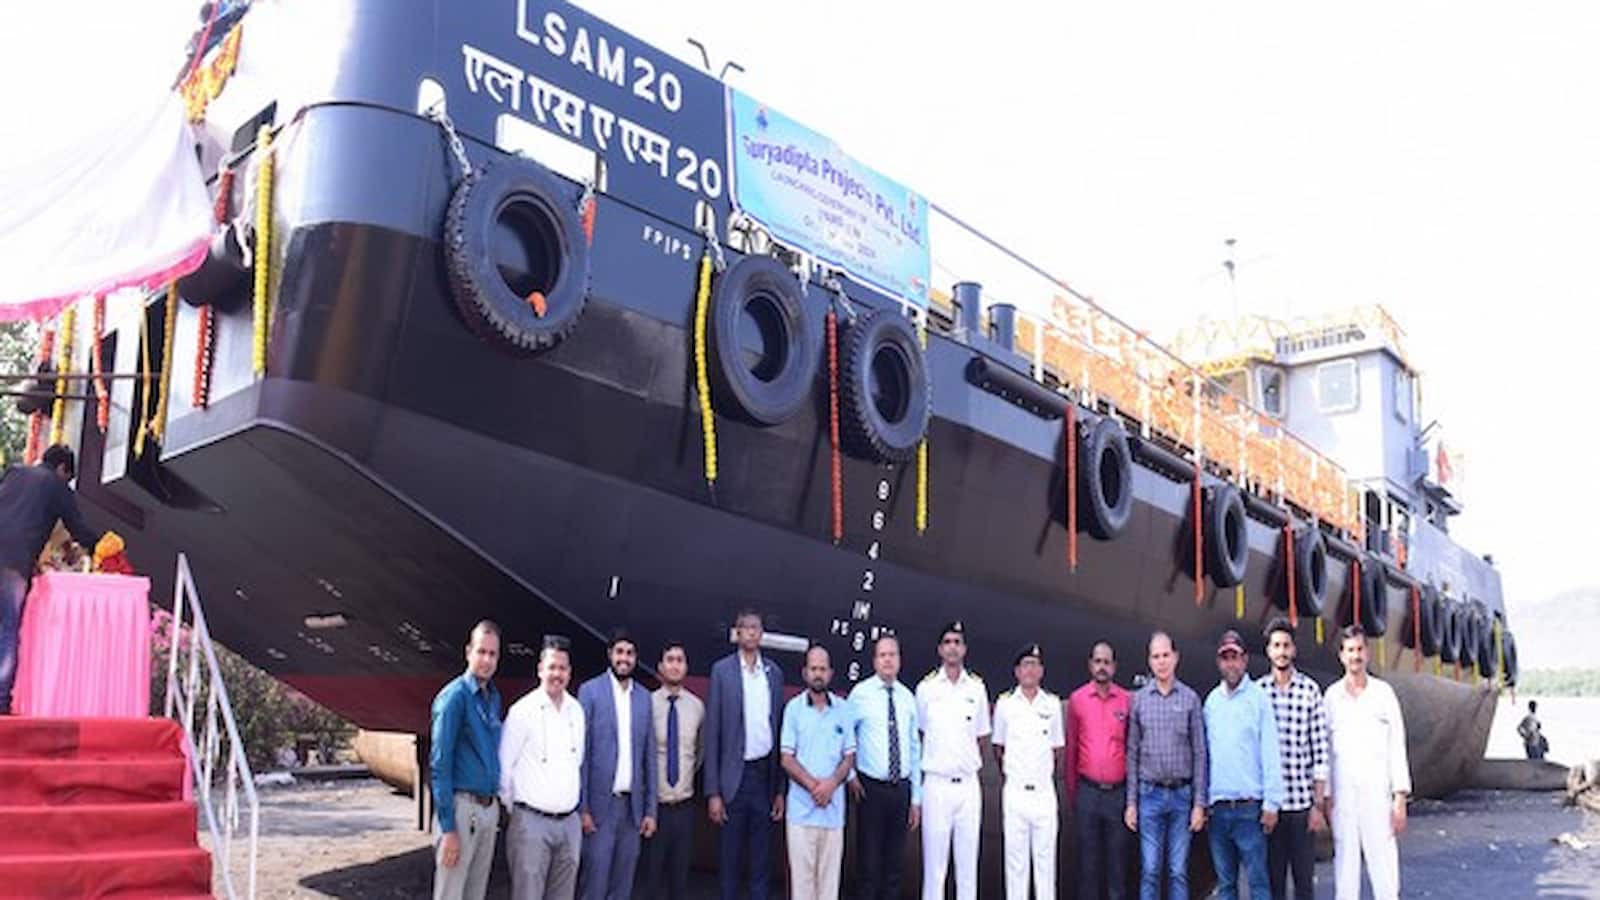 LSAM 16, LSAM 16 launch, Indian Navy LSAM 16